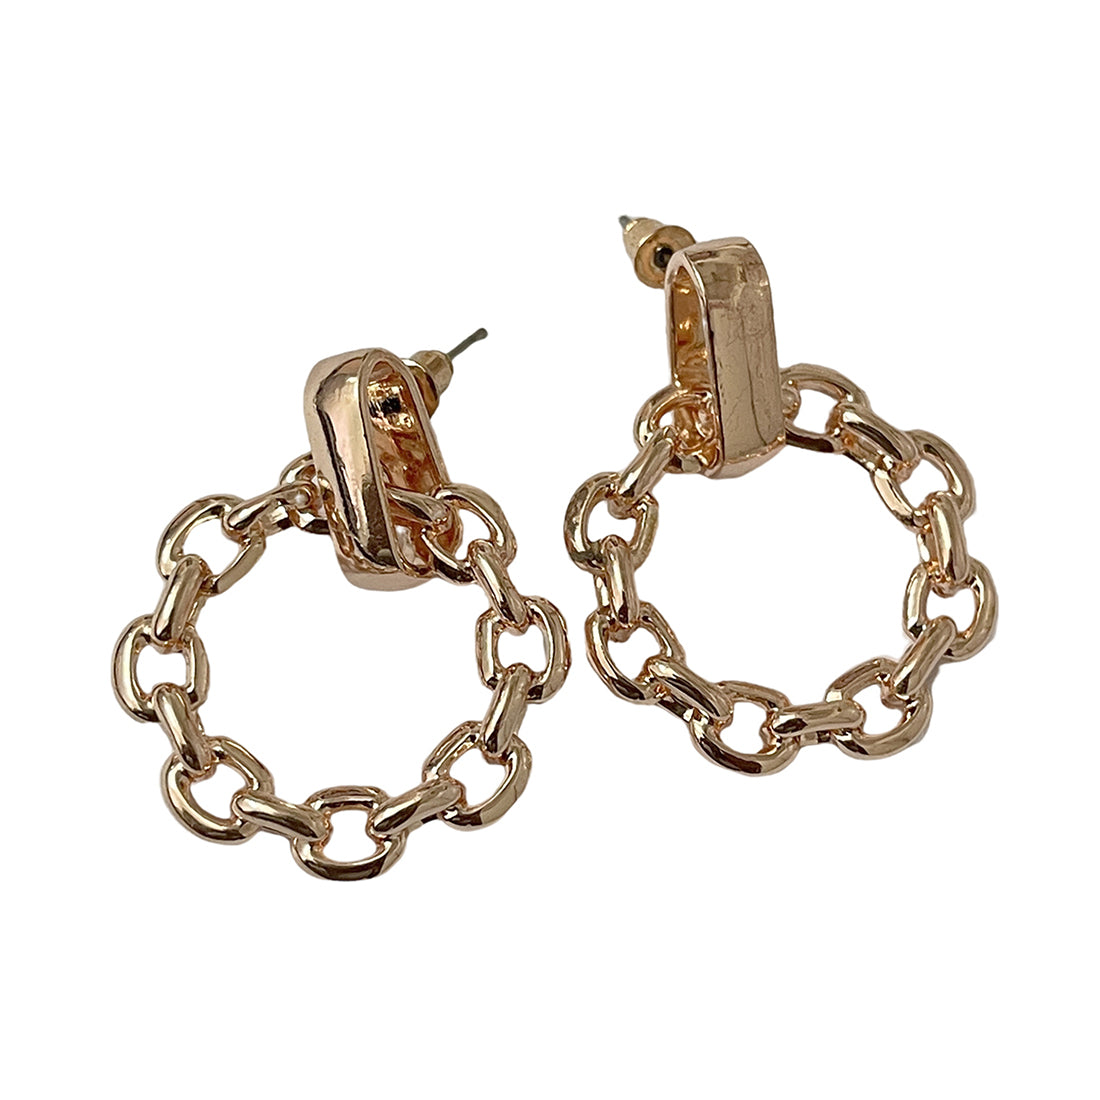 STATEMENT CHAIN-LINK ROSE GOLD-TONED CIRCULAR DROP EARRINGS